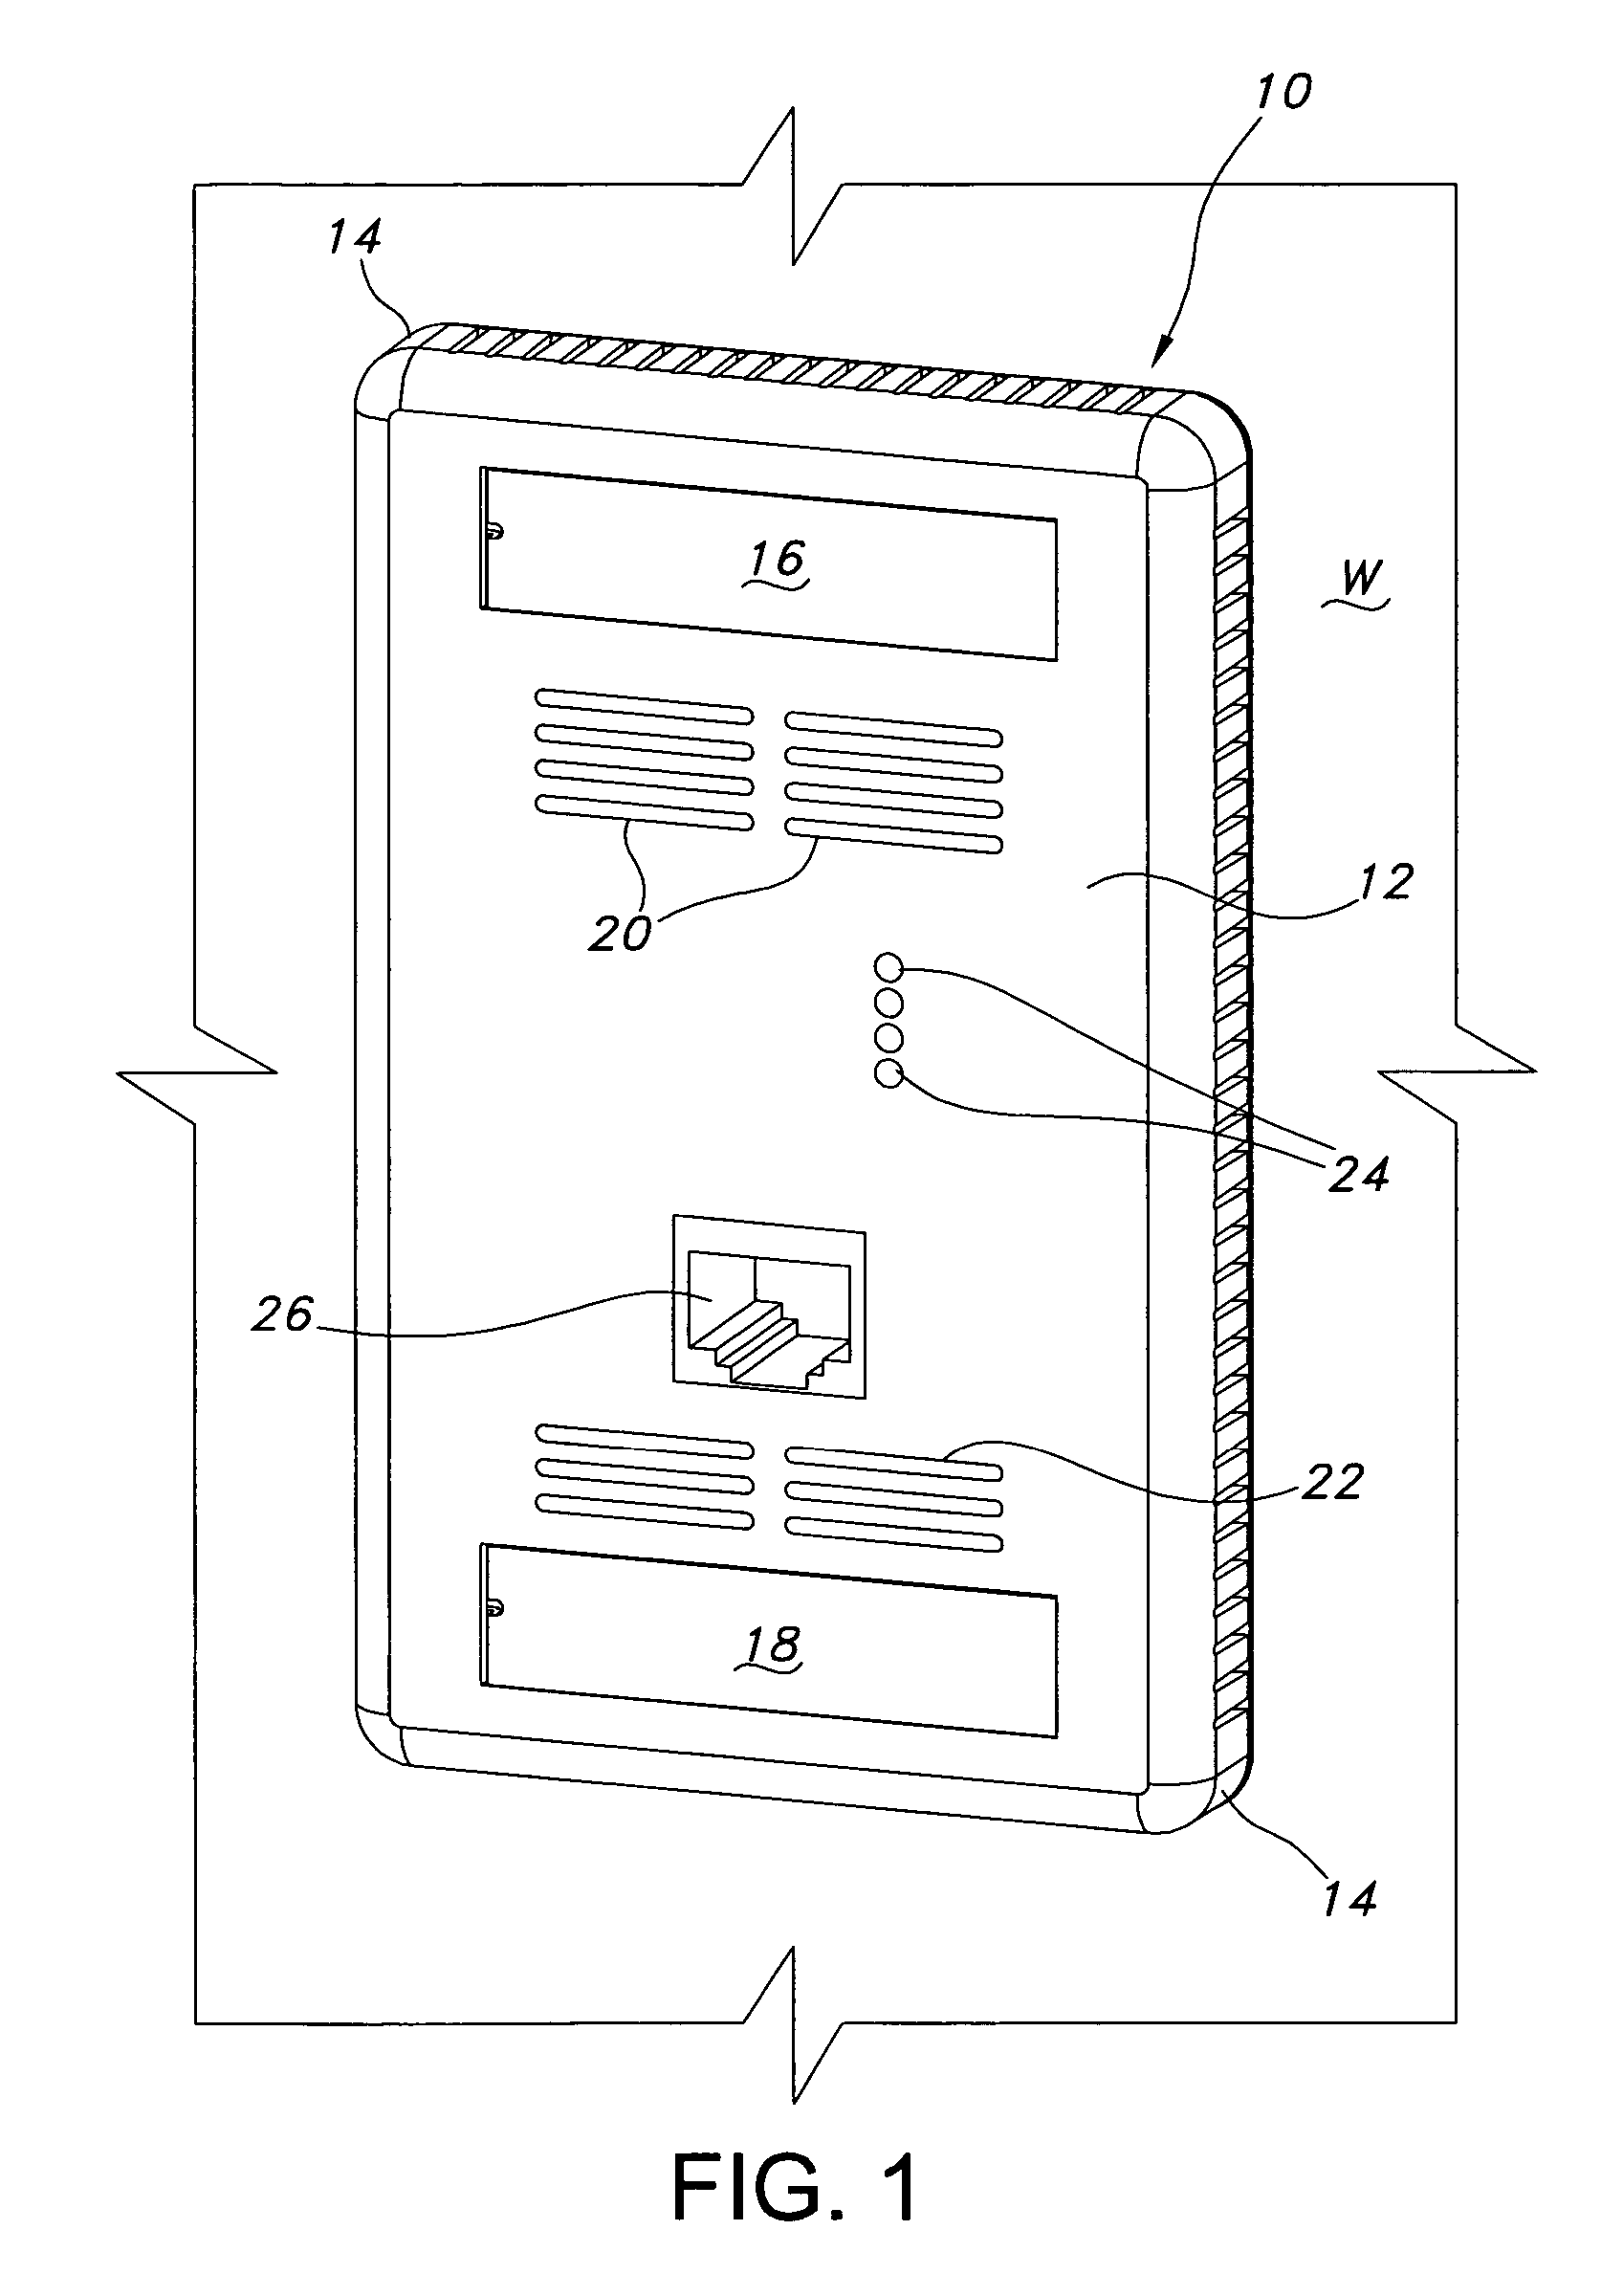 Plug assembly including integral printed circuit board